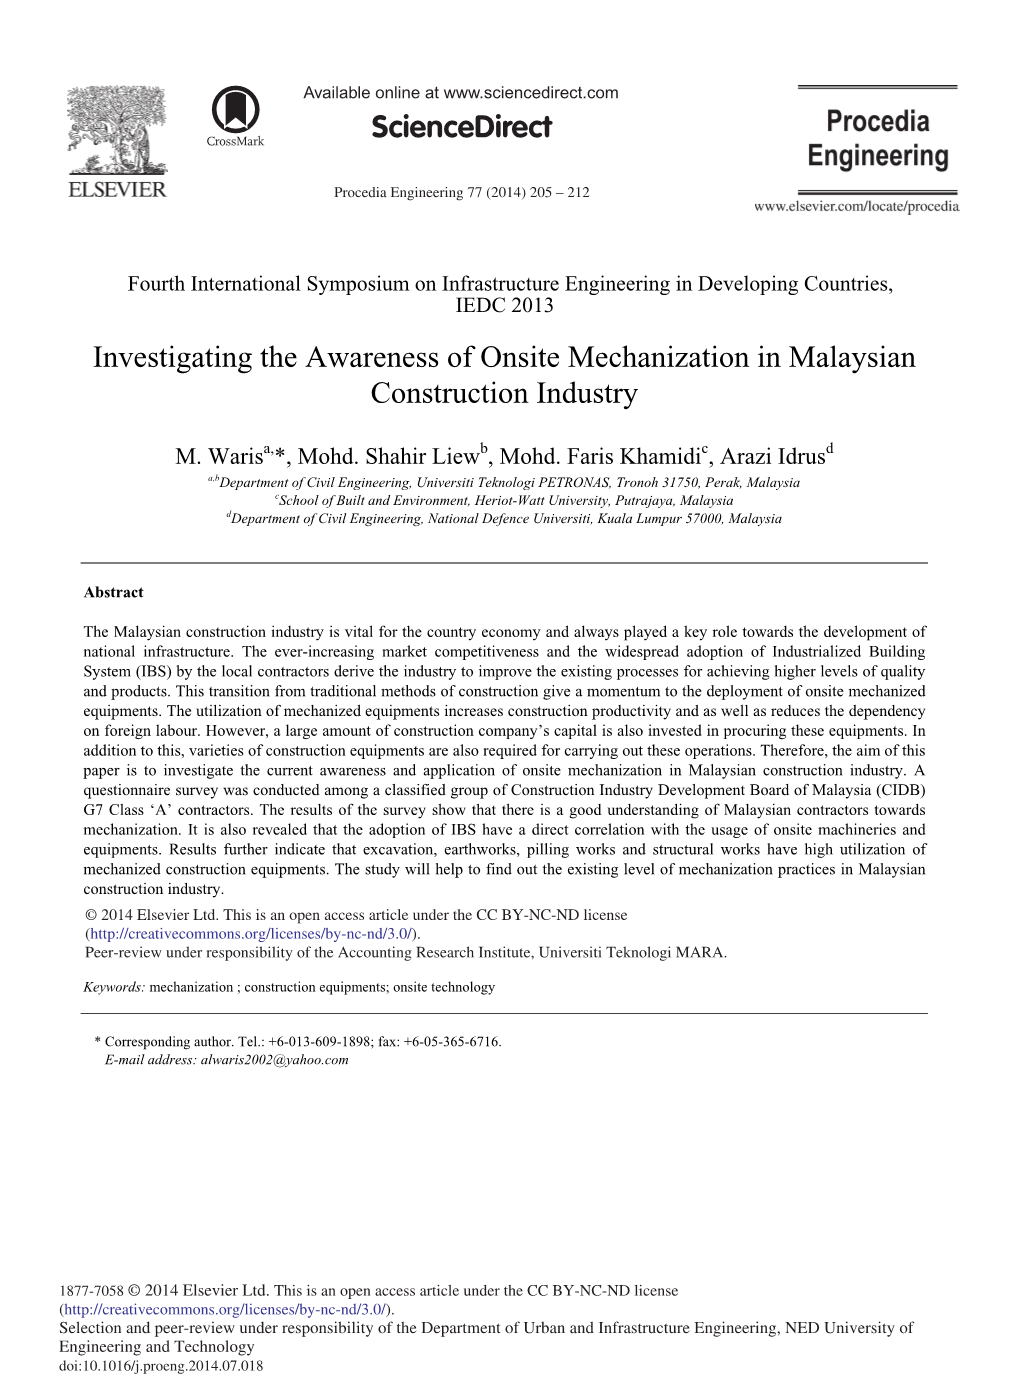 Investigating the Awareness of Onsite Mechanization in Malaysian Construction Industry